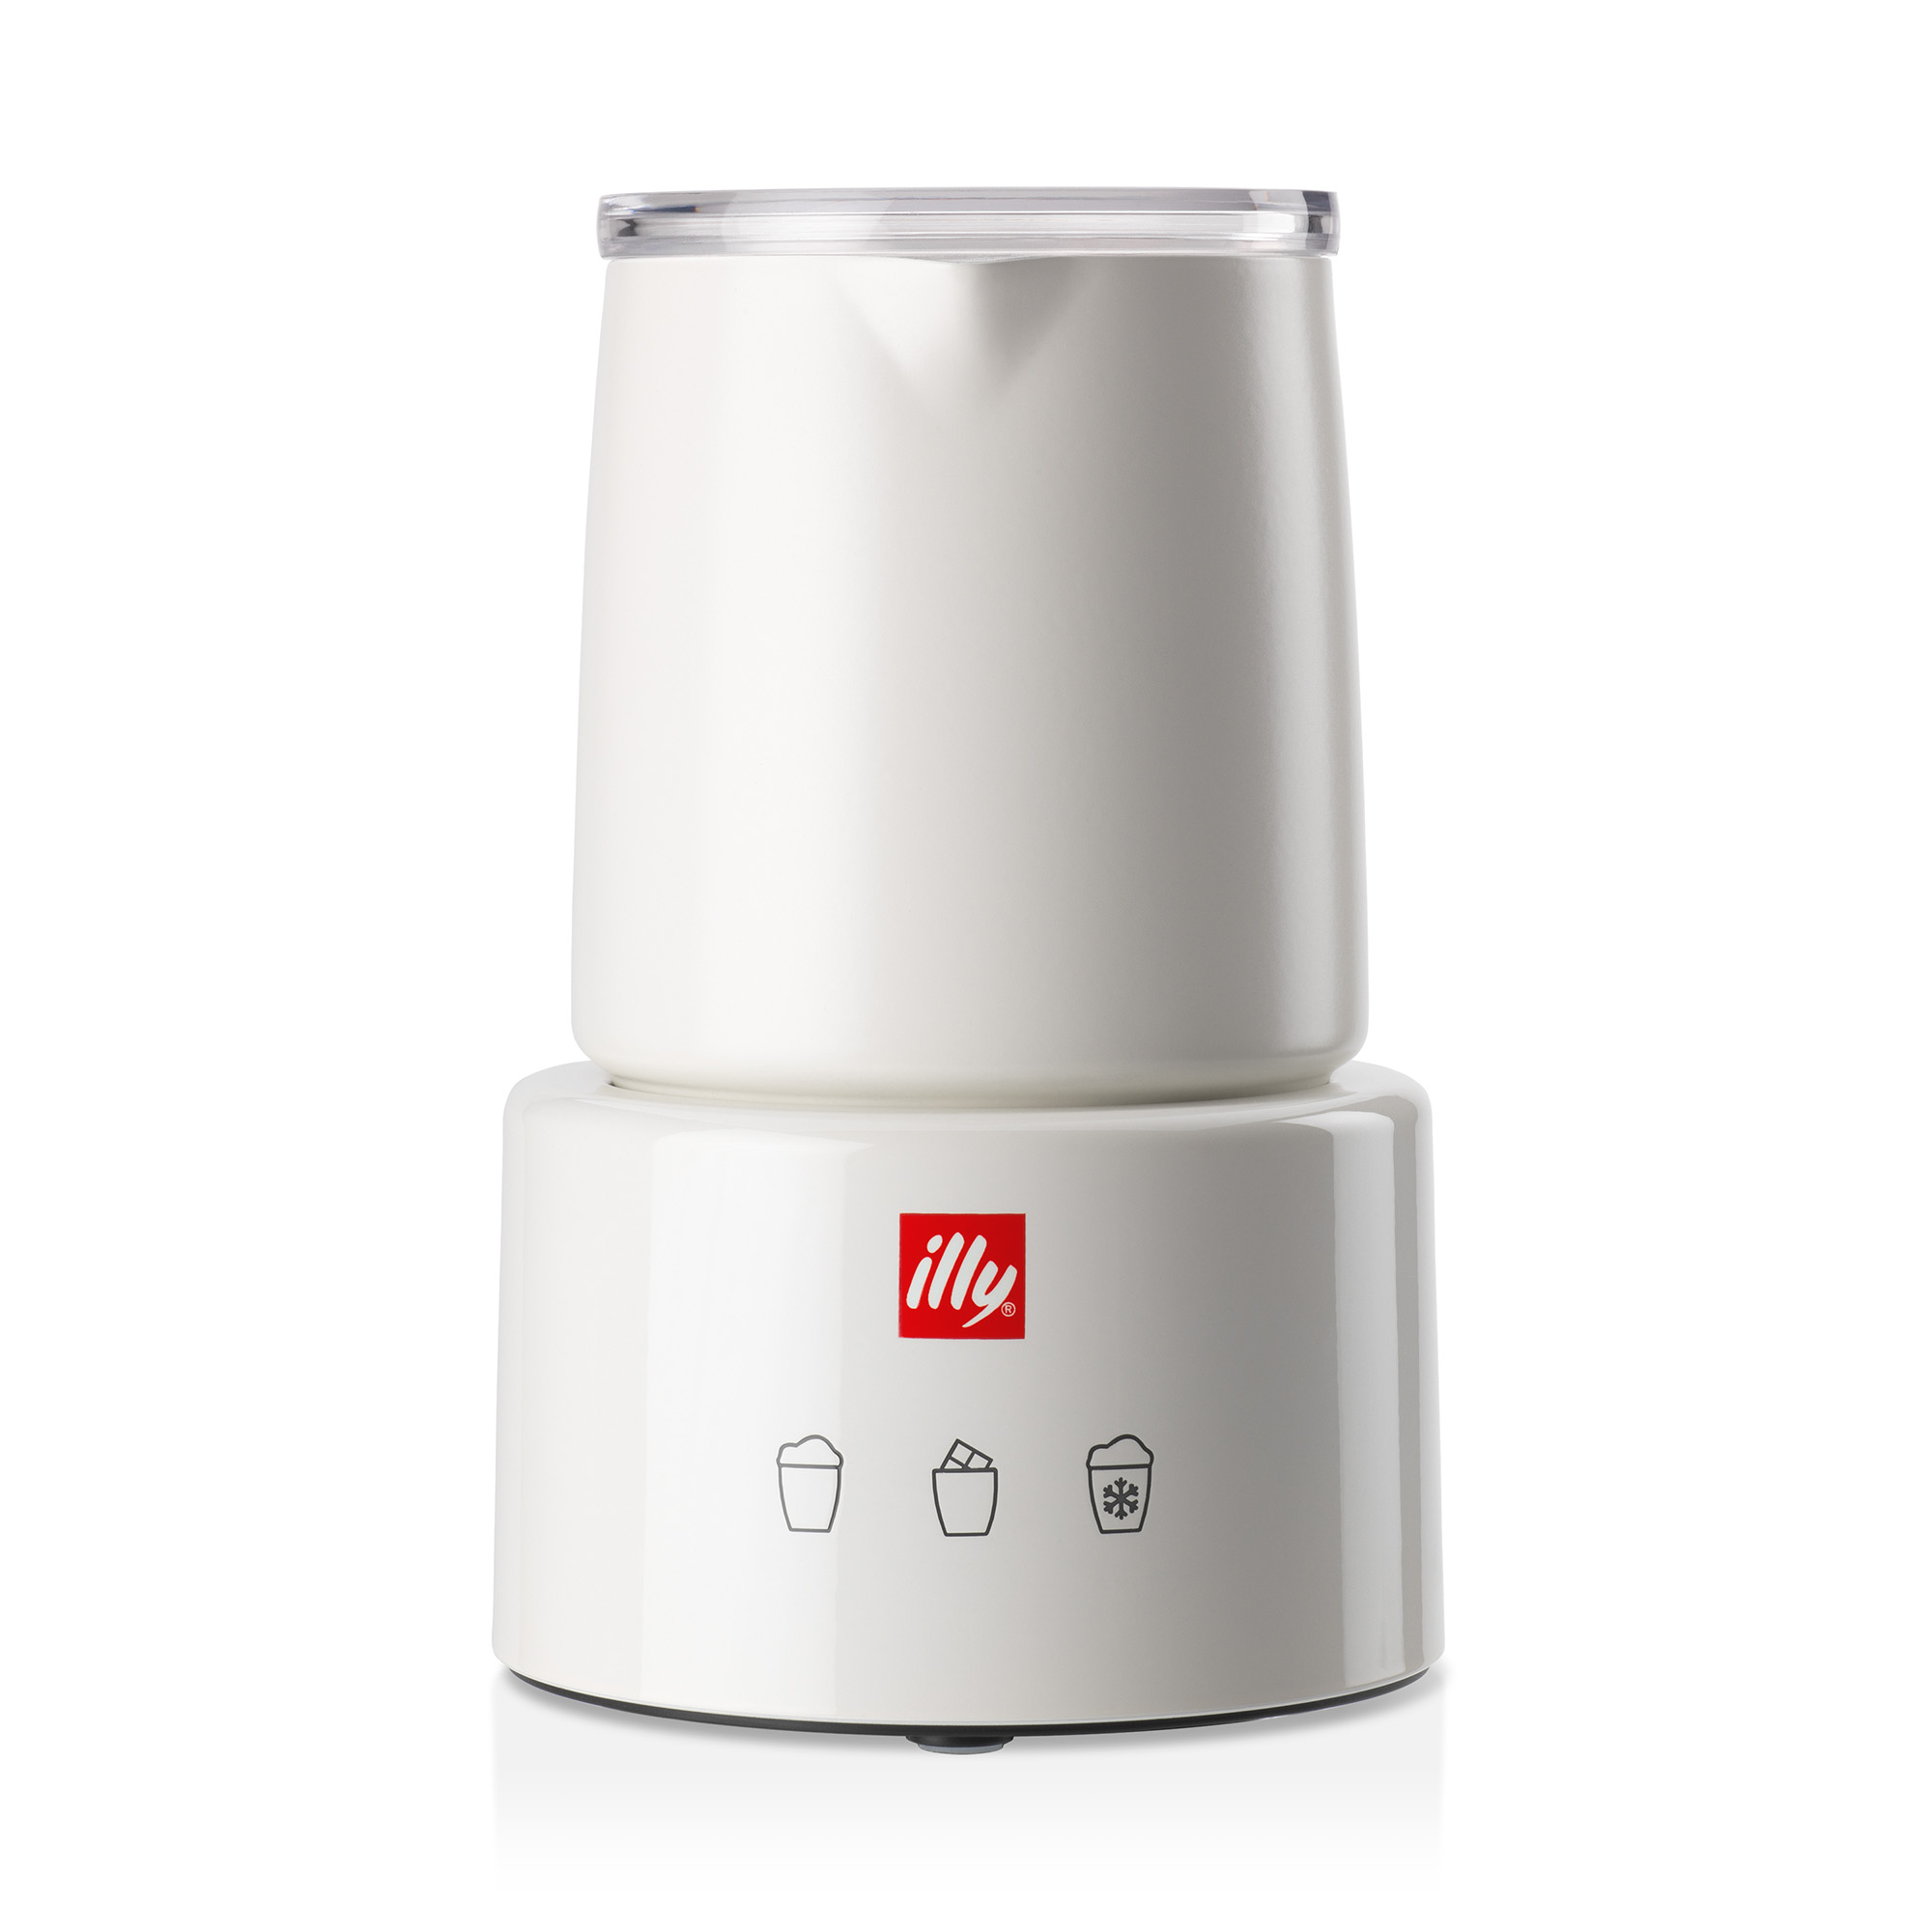 https://www.illy.com/on/demandware.static/-/Sites-masterCatalog_illycaffe/default/dw63c92ae4/products/Cups/Accessories/22984_coffee-machines_accessories_milk-frother_illy-shop/2020_MilkFrother_Front.jpg